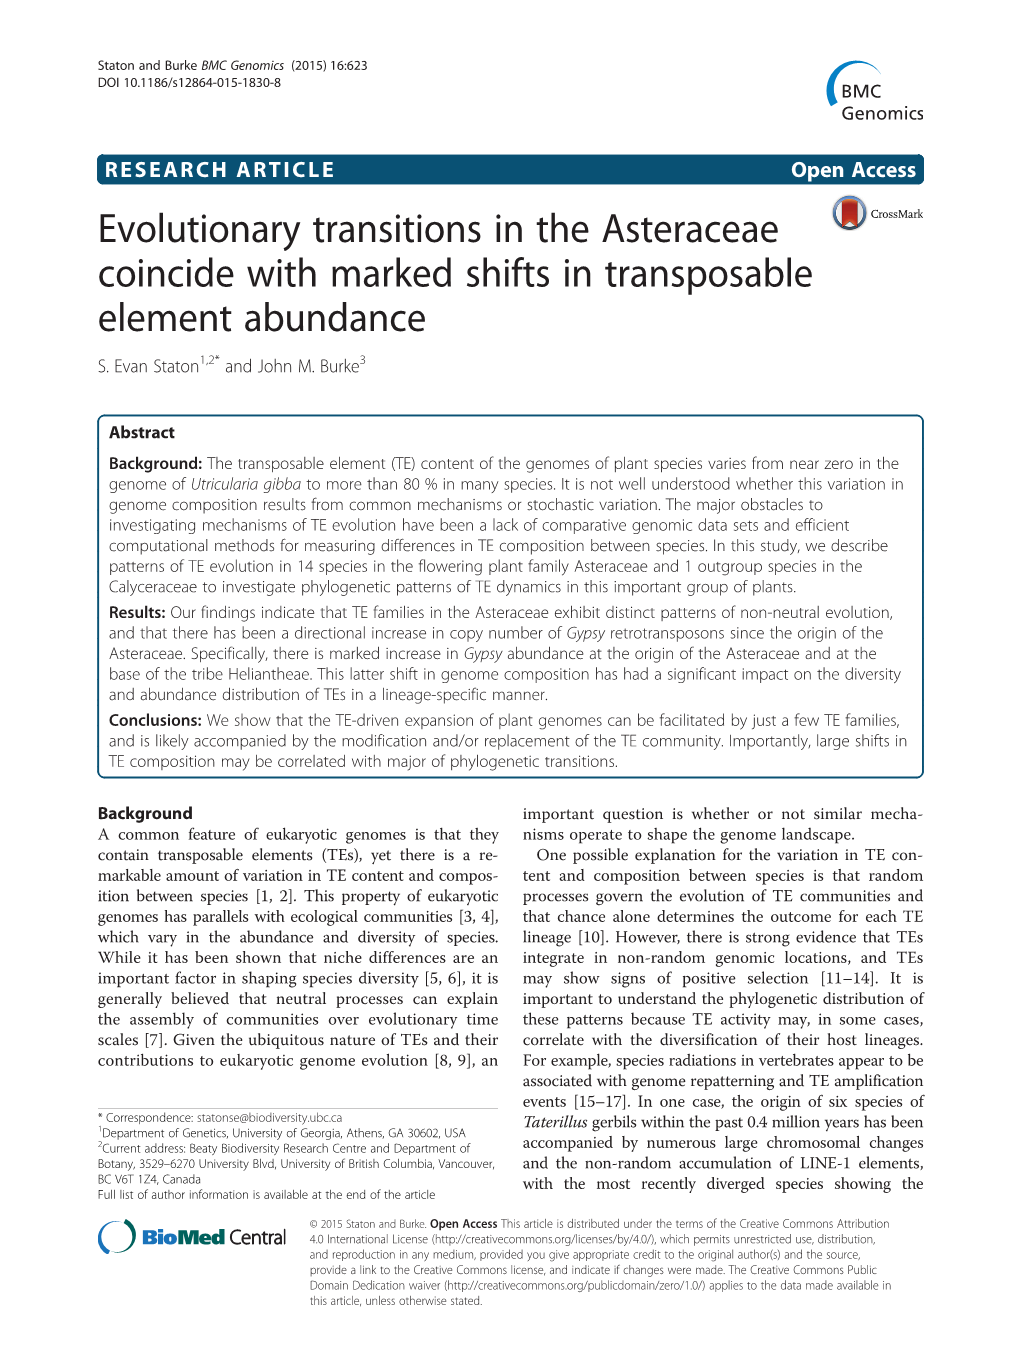 Evolutionary Transitions in the Asteraceae Coincide with Marked Shifts in Transposable Element Abundance S